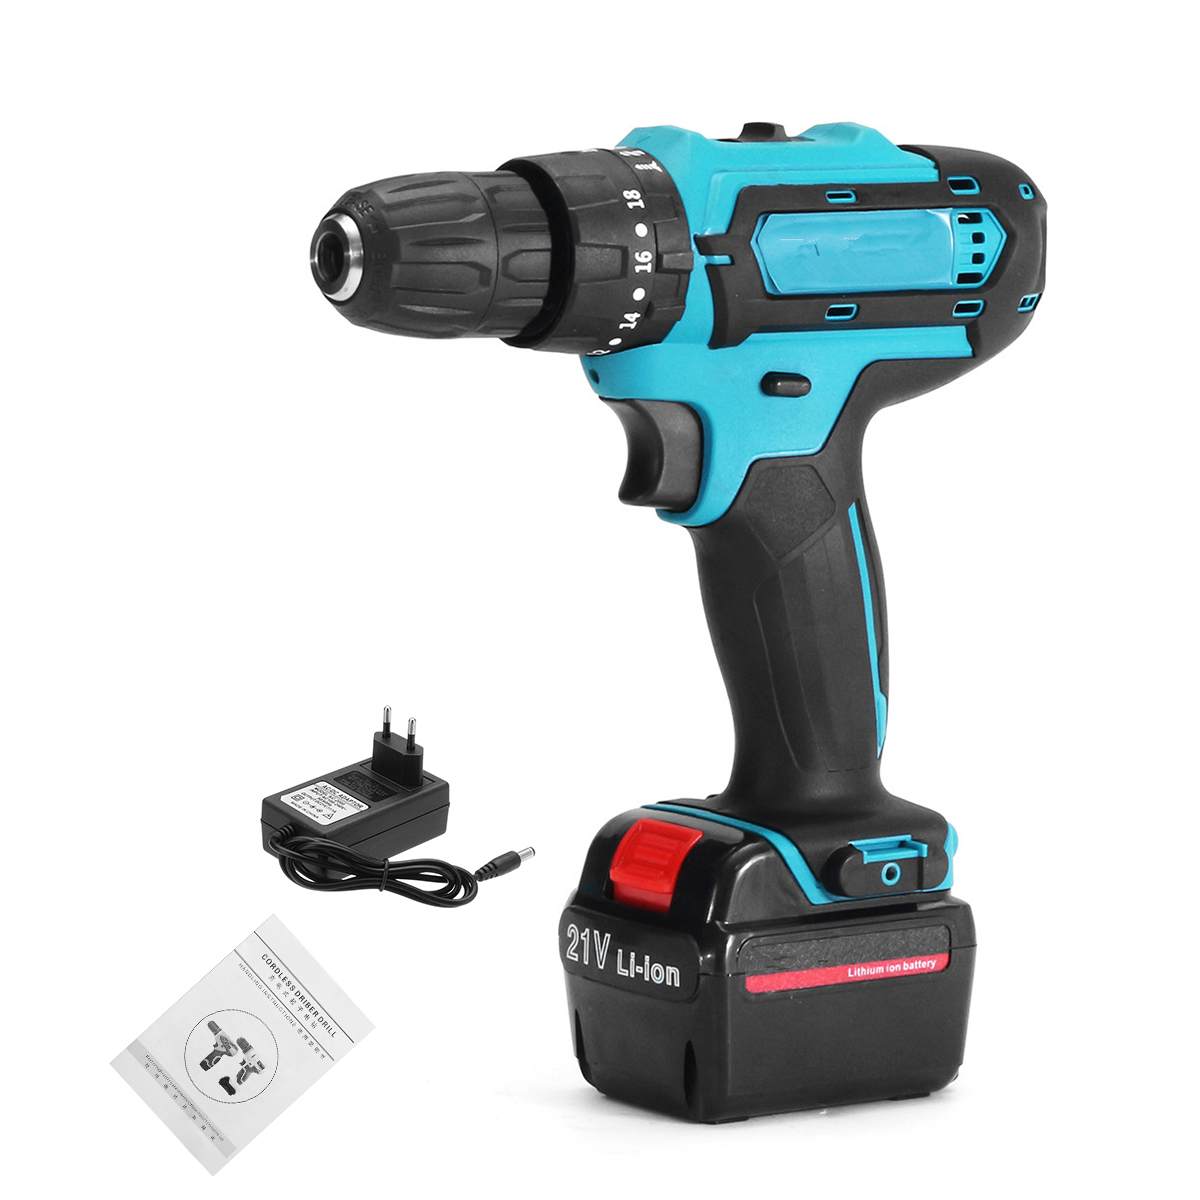 12V-Cordless-Electric-Impact-Drill-Multi-function-Hand-Hammer-Screwdriver-Lithium-Battery-Rechargabl-1452371-2